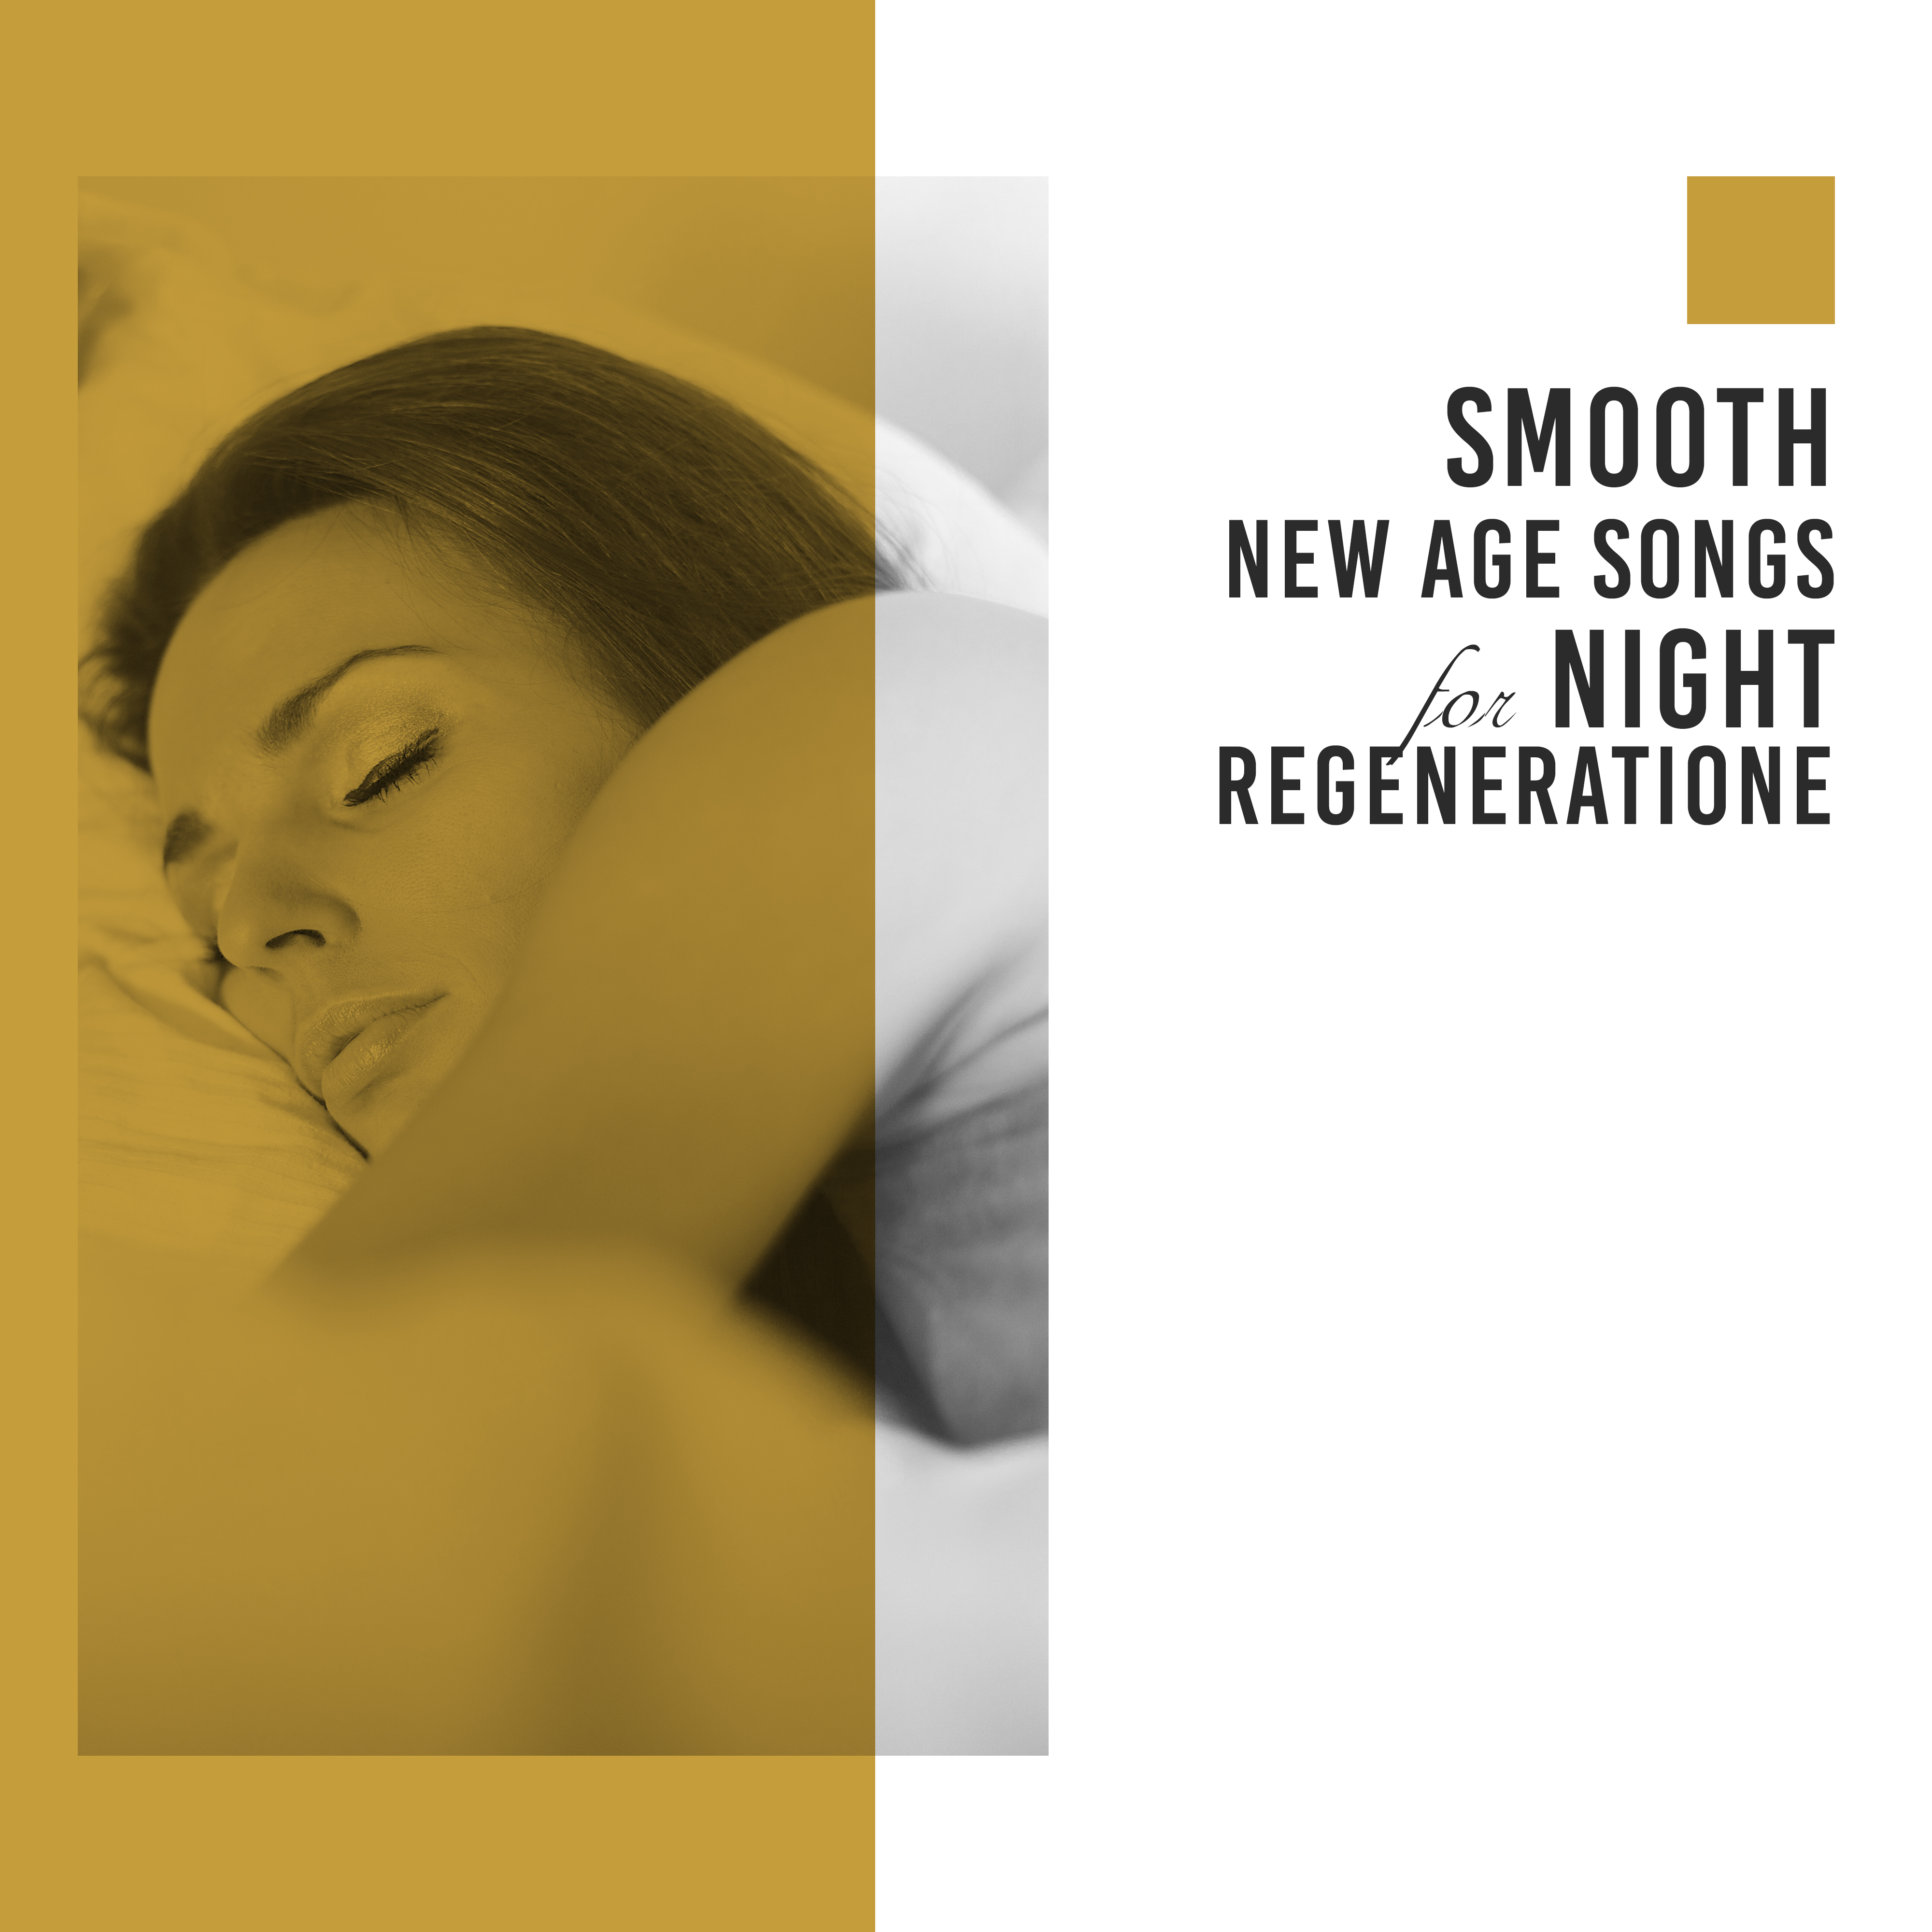 Smooth New Age Songs for Night Regeneration